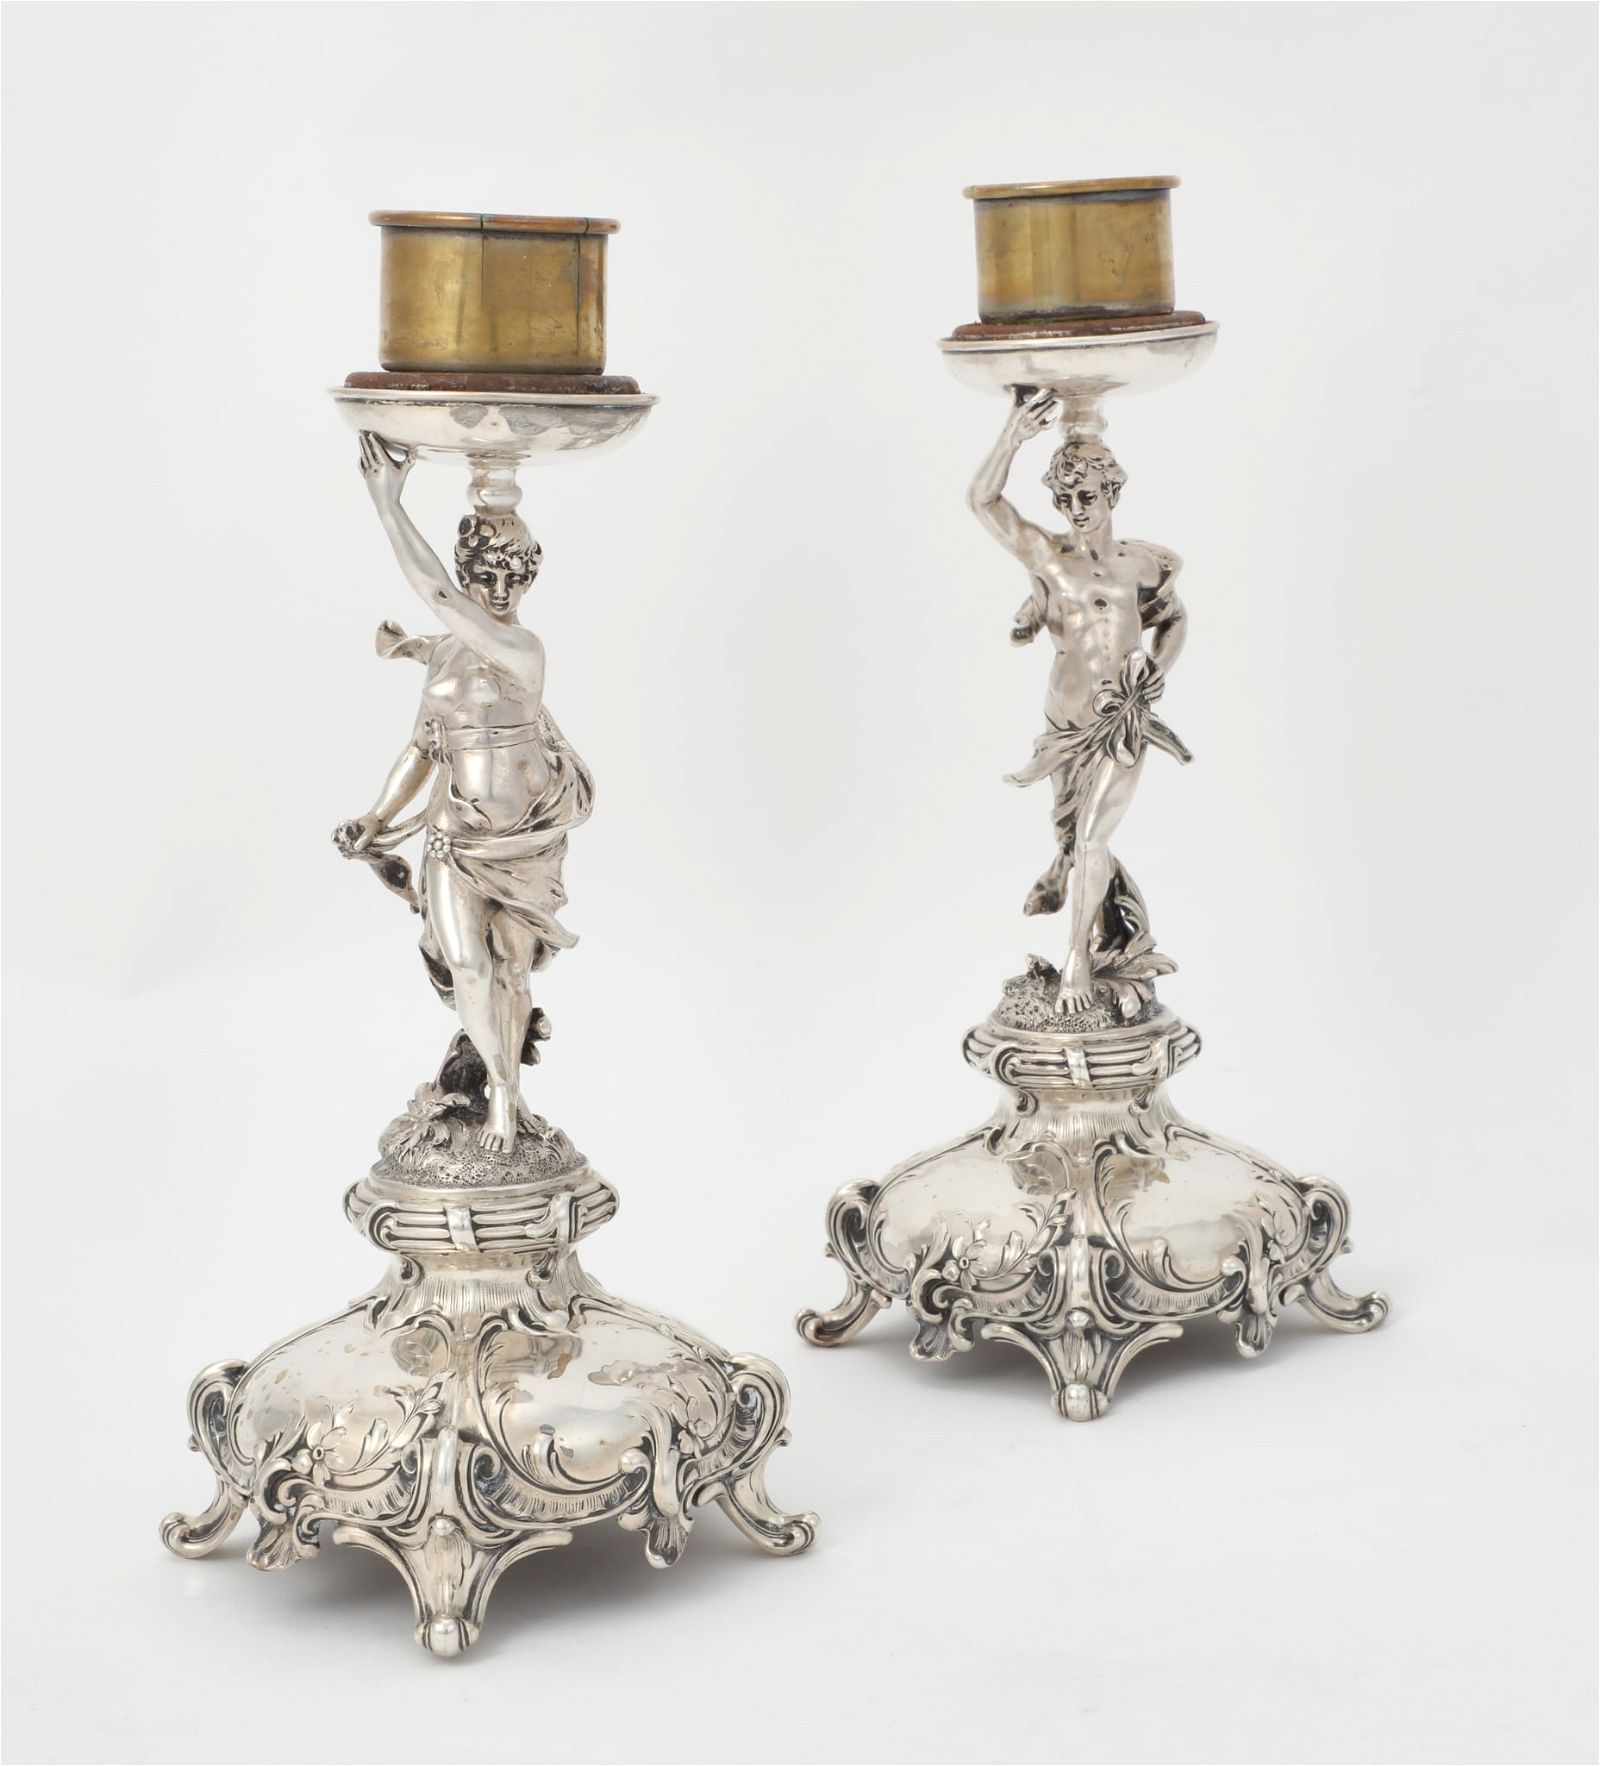 A PAIR OF GERMAN SILVER FIGURAL